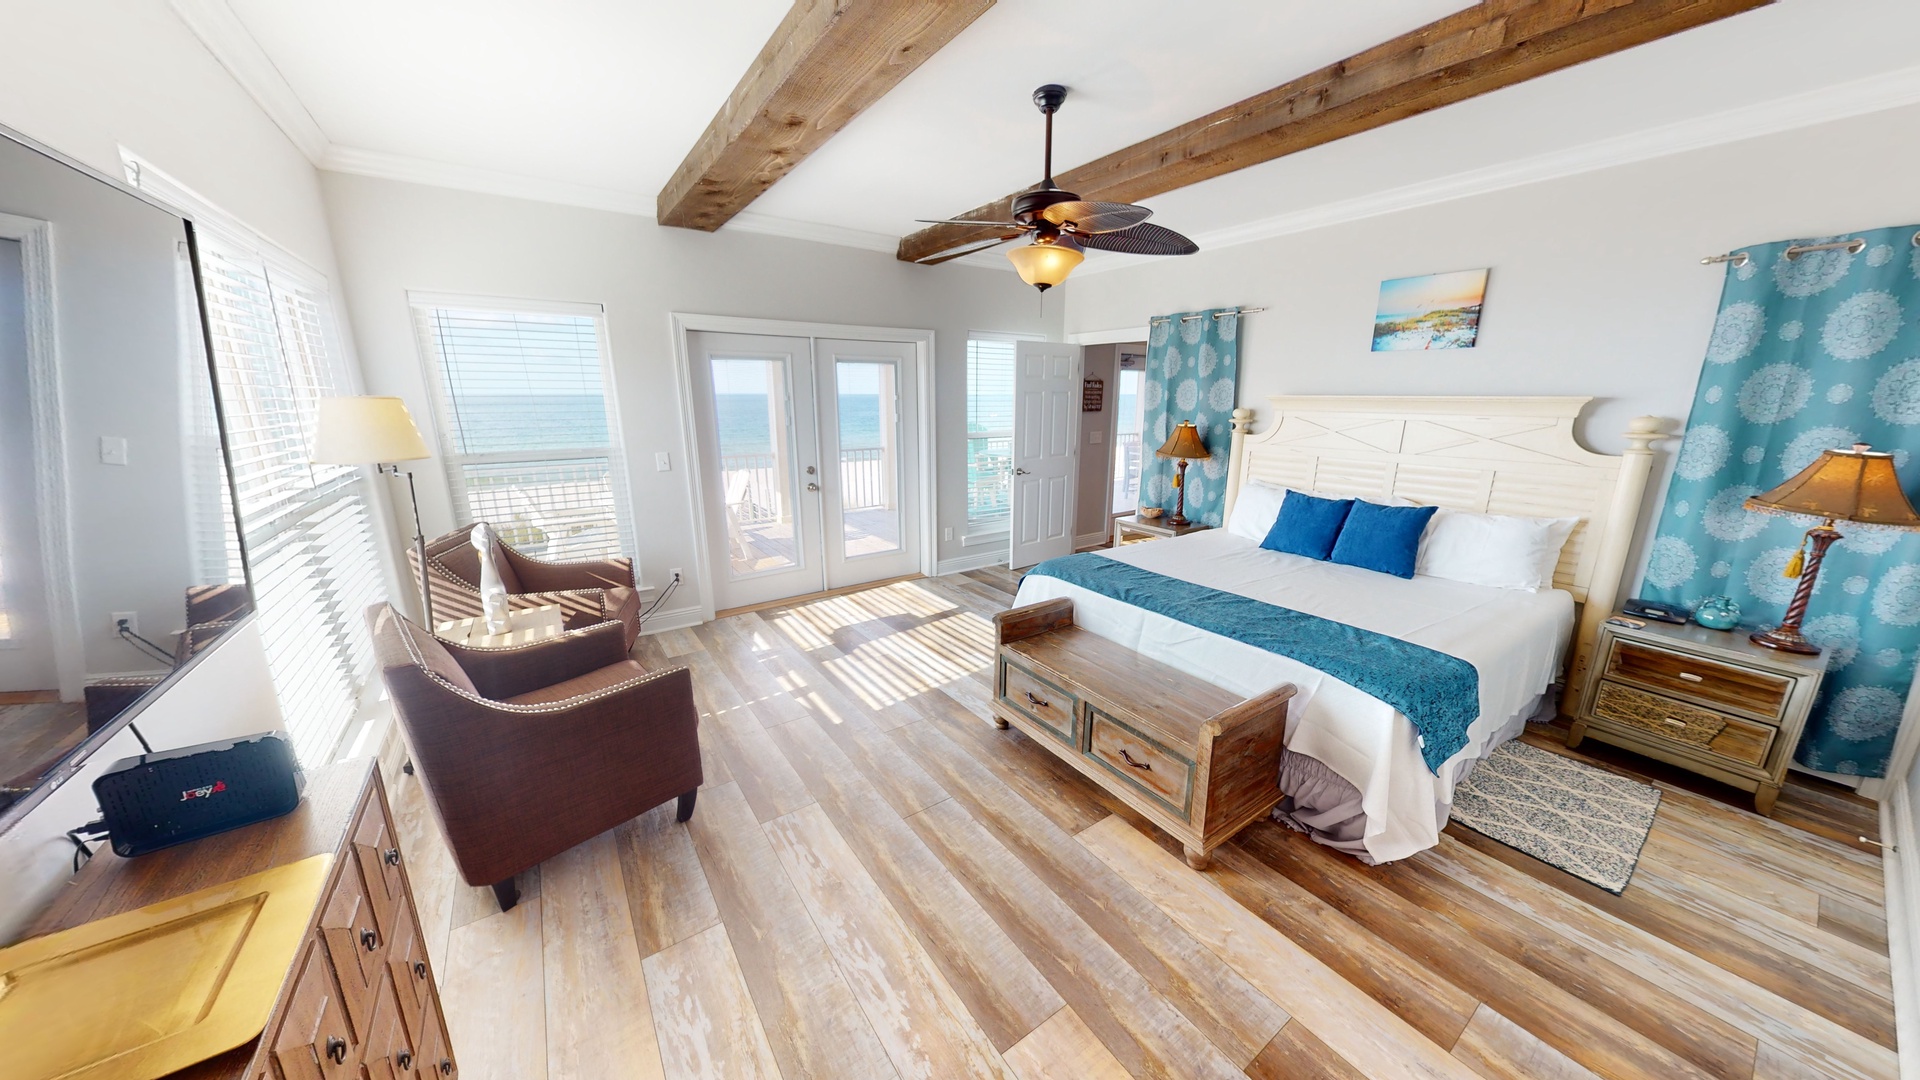 Master bedroom 1 is on the 1st floor with incredible Gulf views and deck access